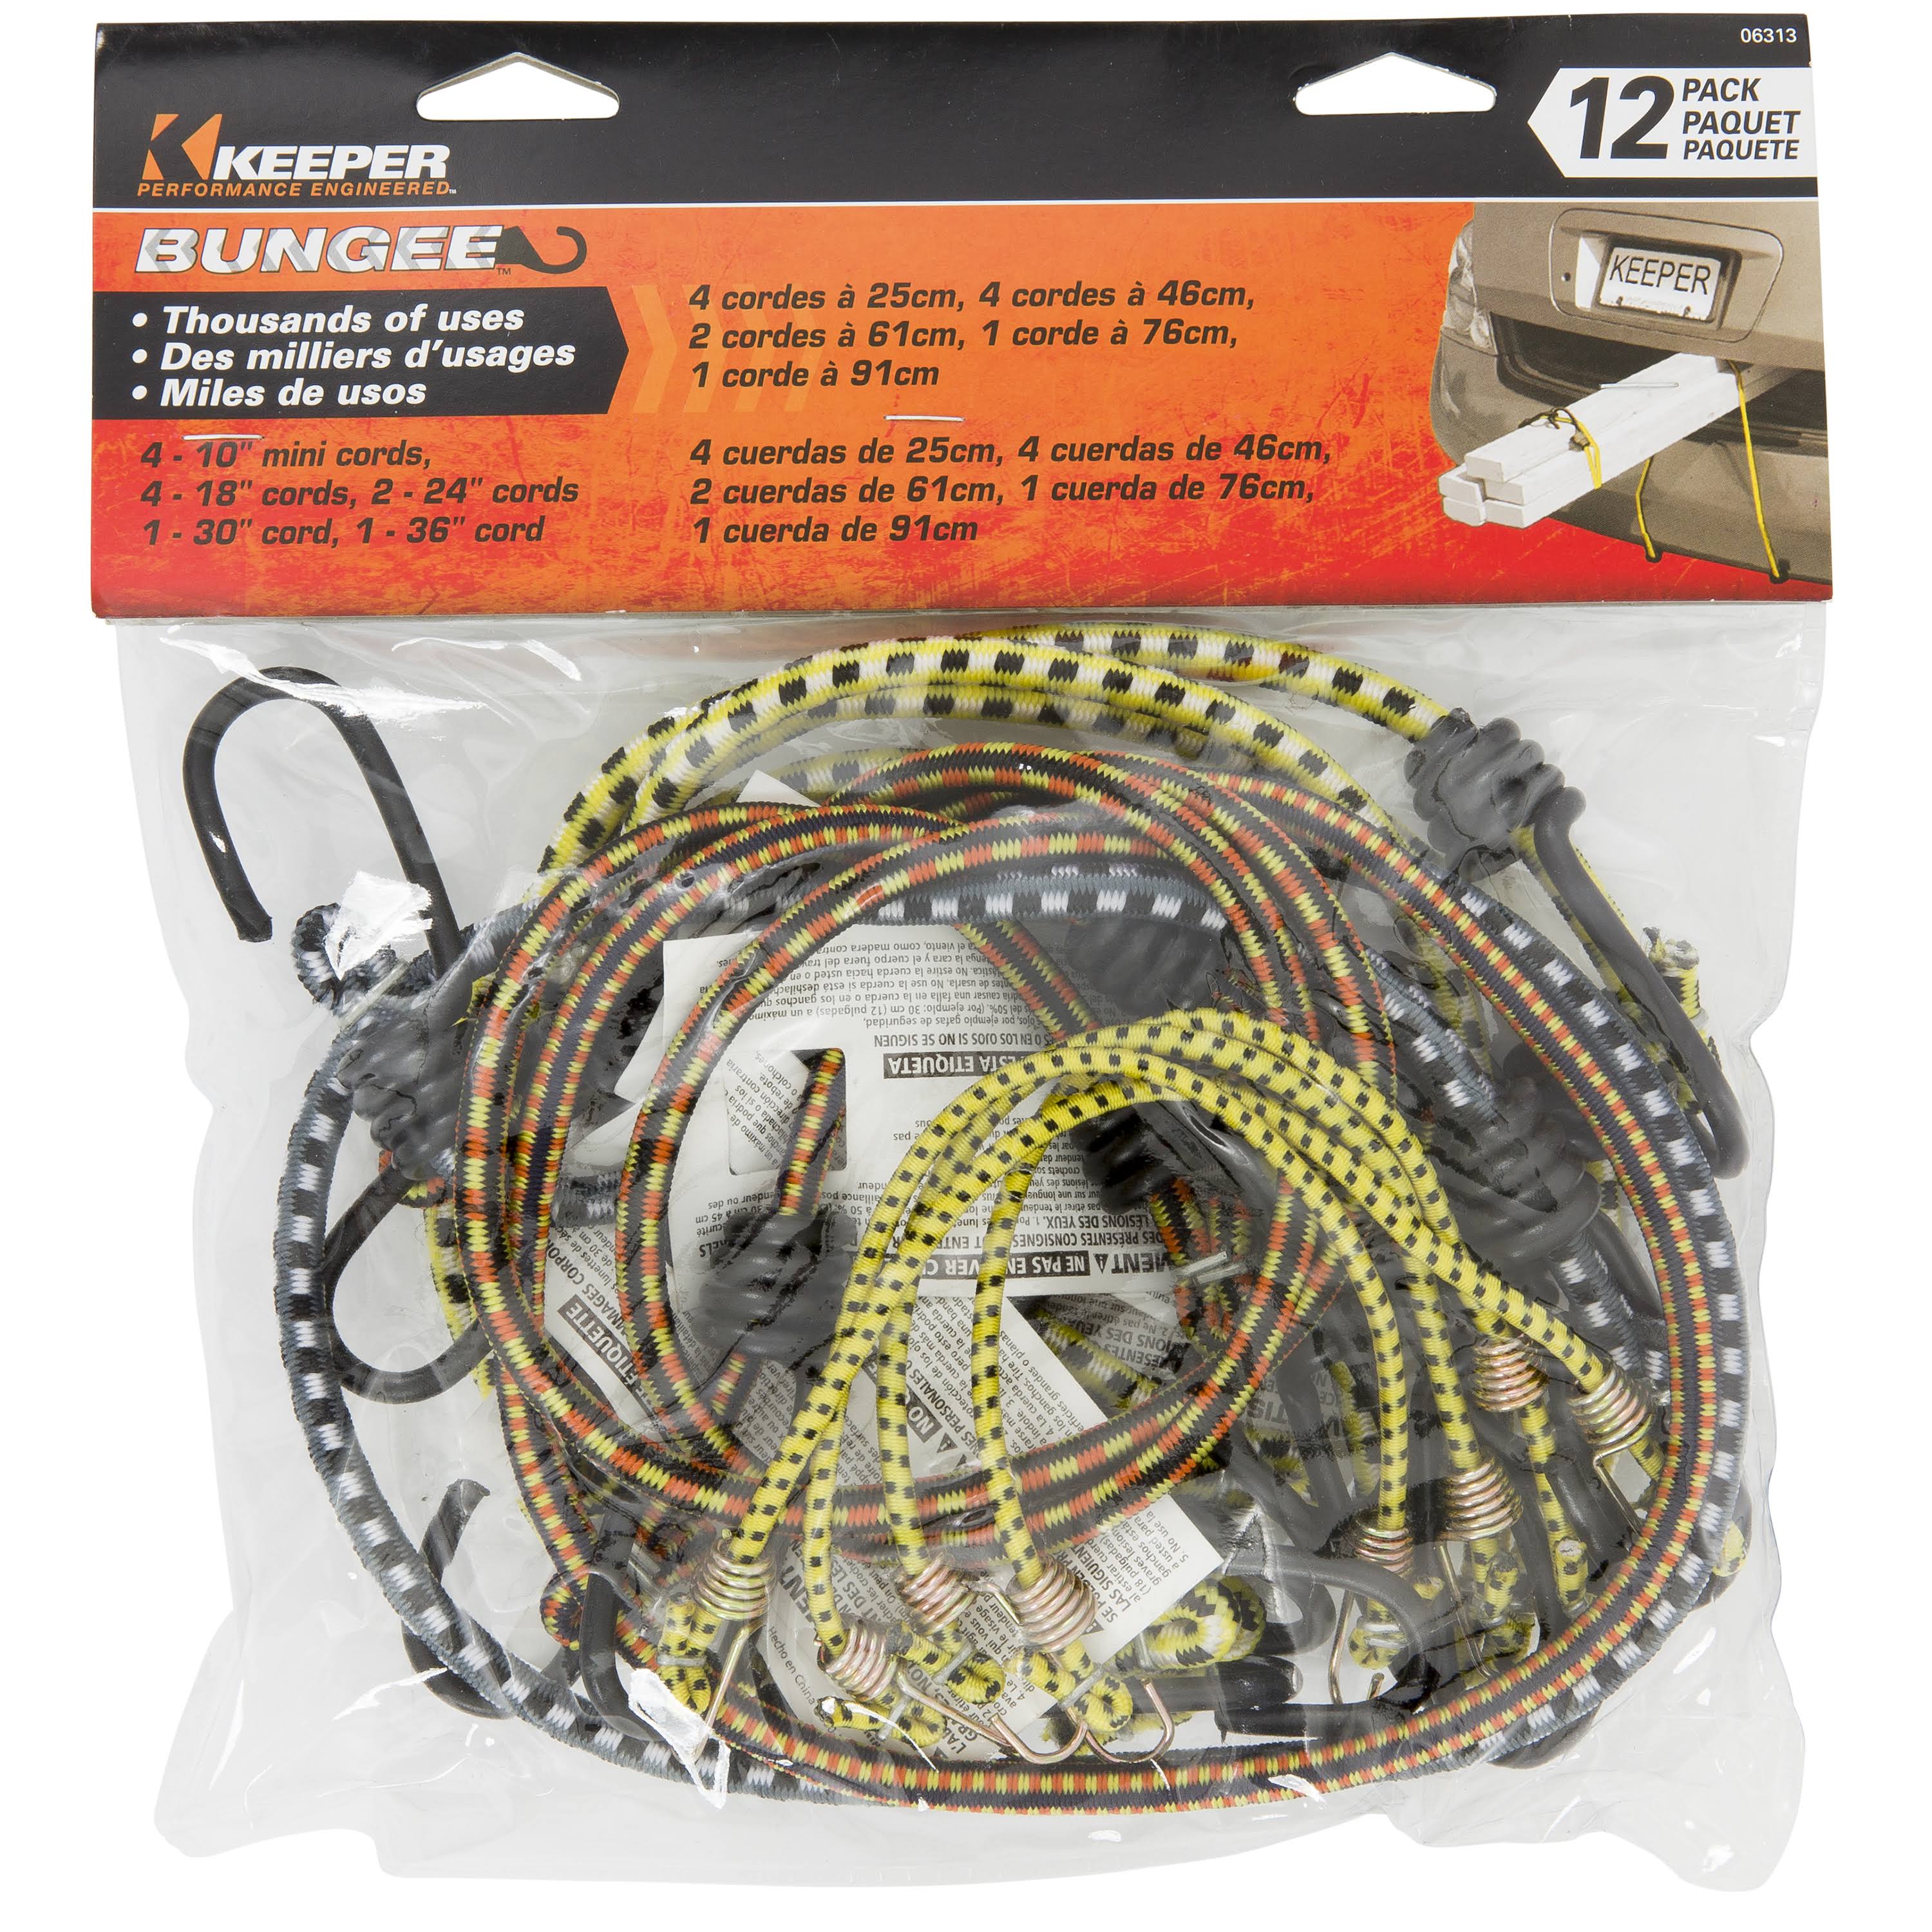 Keeper Bungee Cords - 12 Bungee Cords